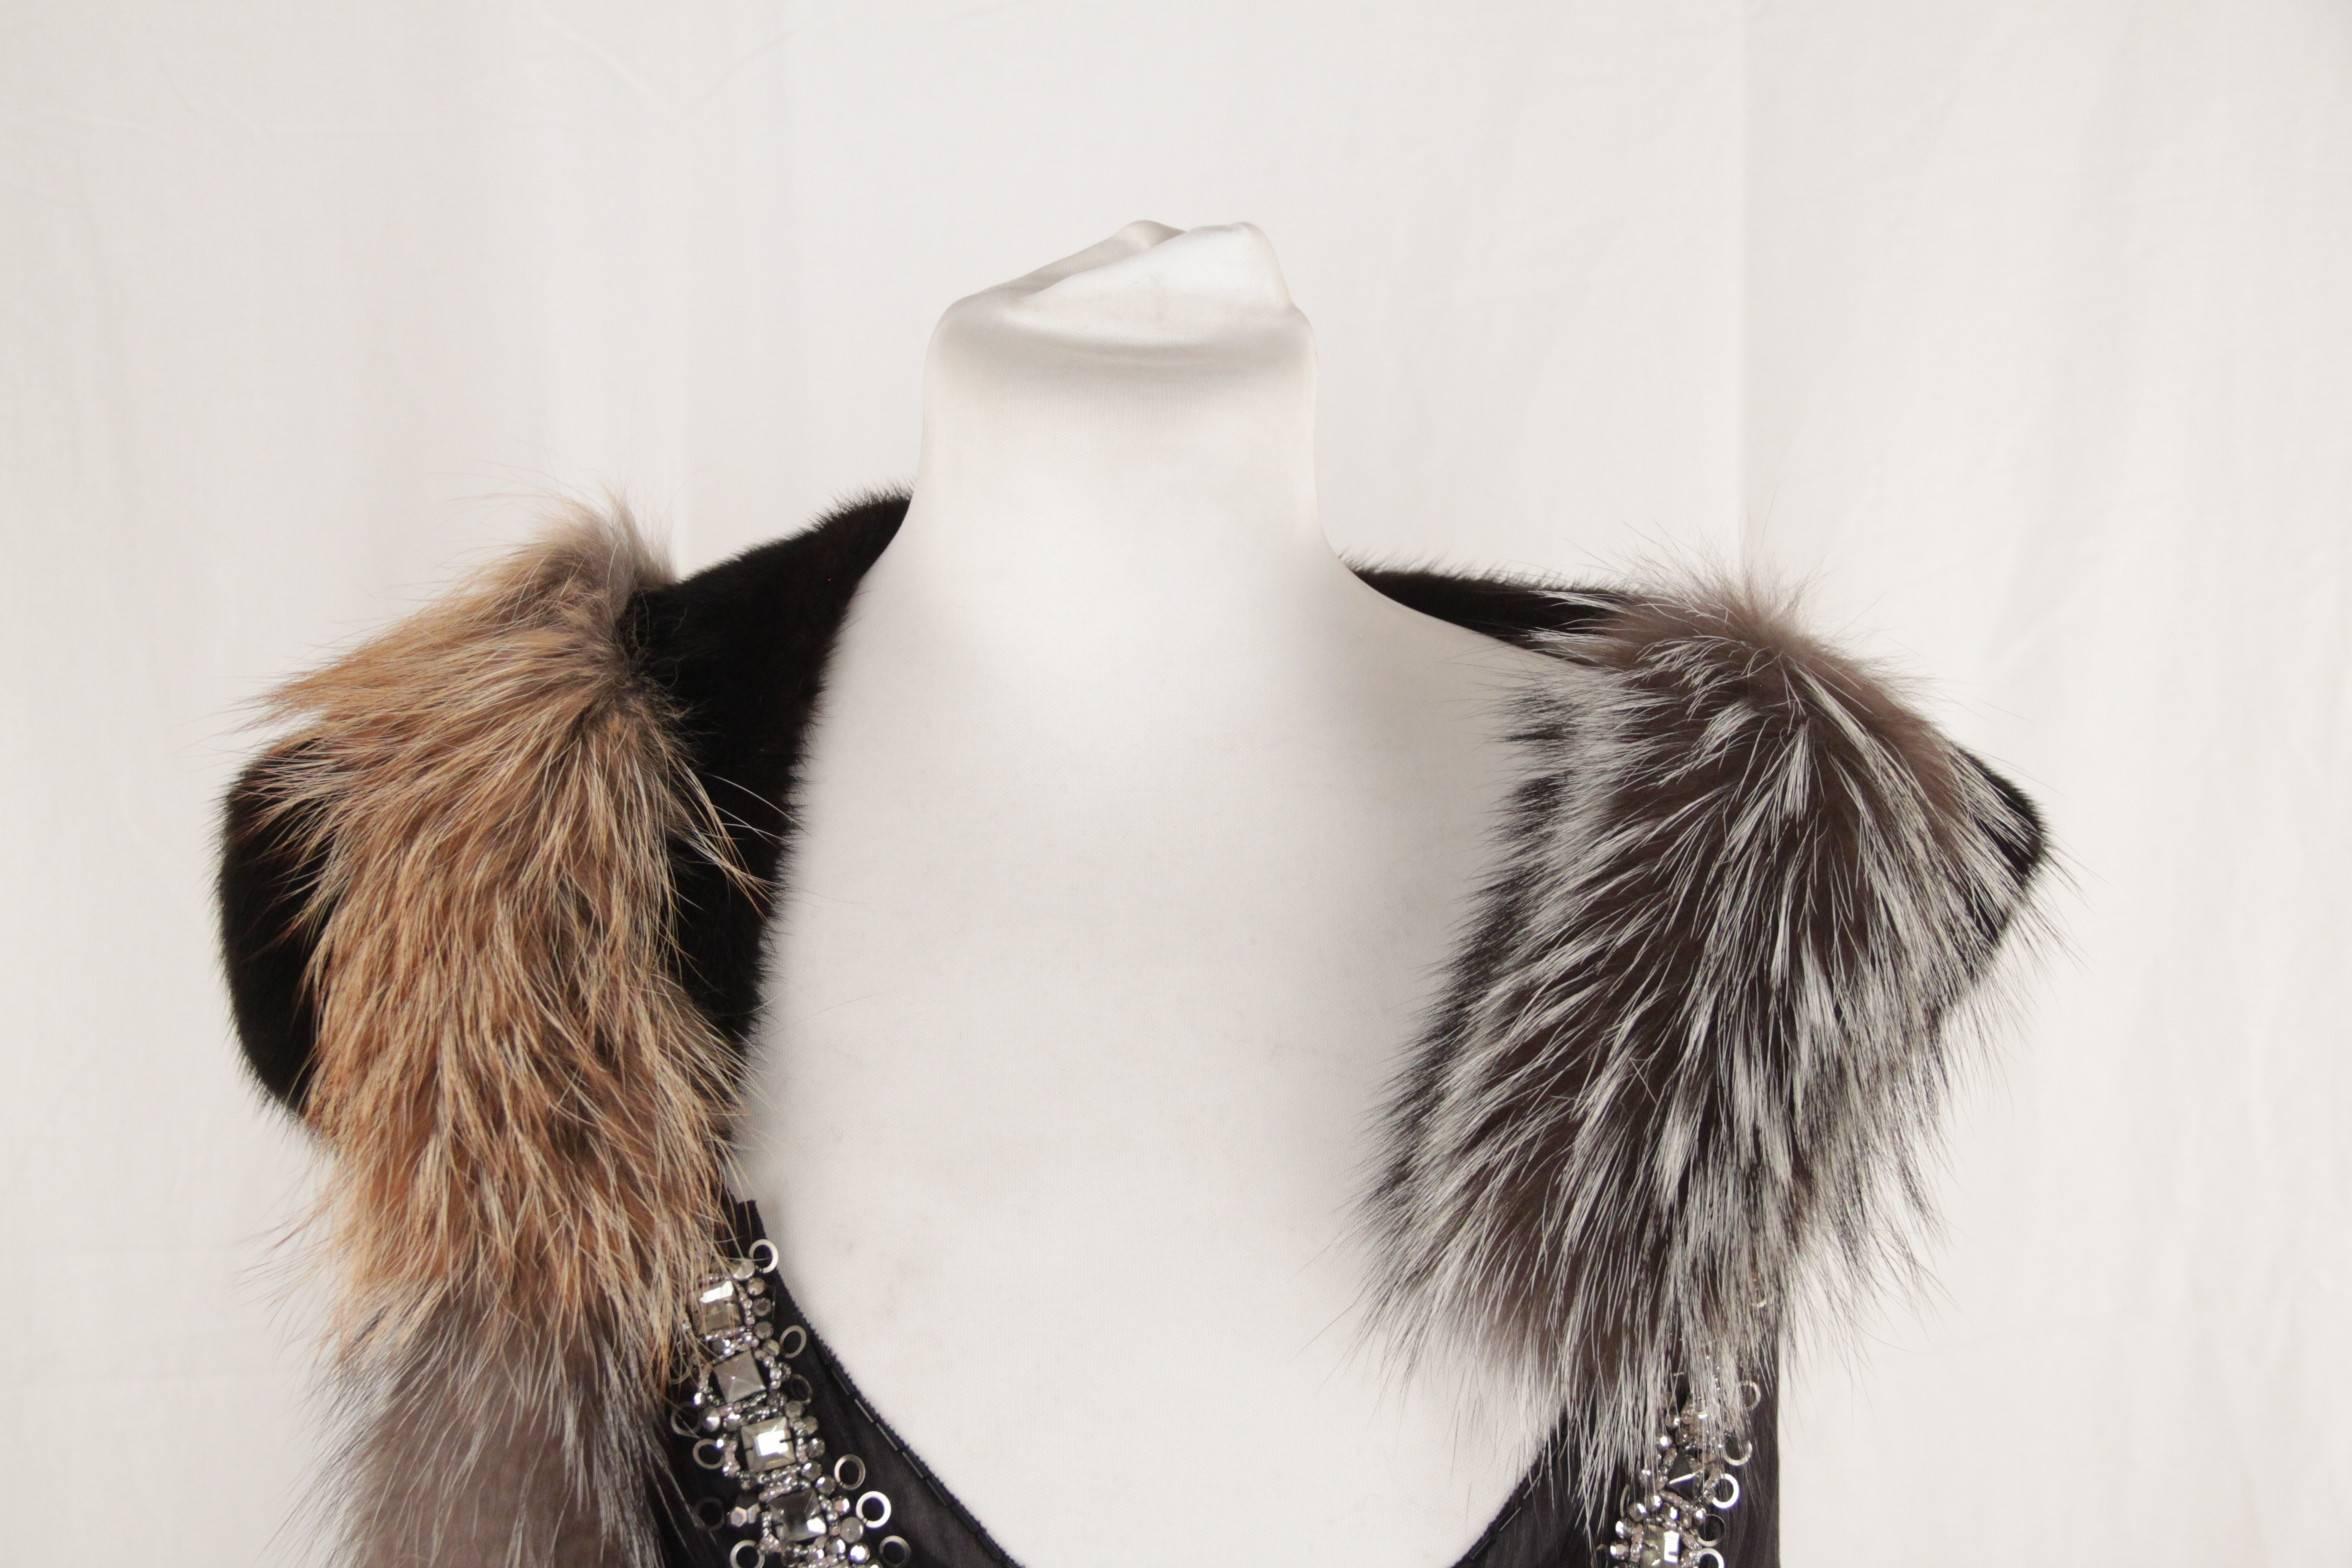 

- Composition: 100% Silk

- V-neckline with fox fur trim

- rhinestones embellishment

- Side zip closure
- Size: 42 IT (The size shown for this item is the size indicated by the designer on the label) It should correspond to a SMALL